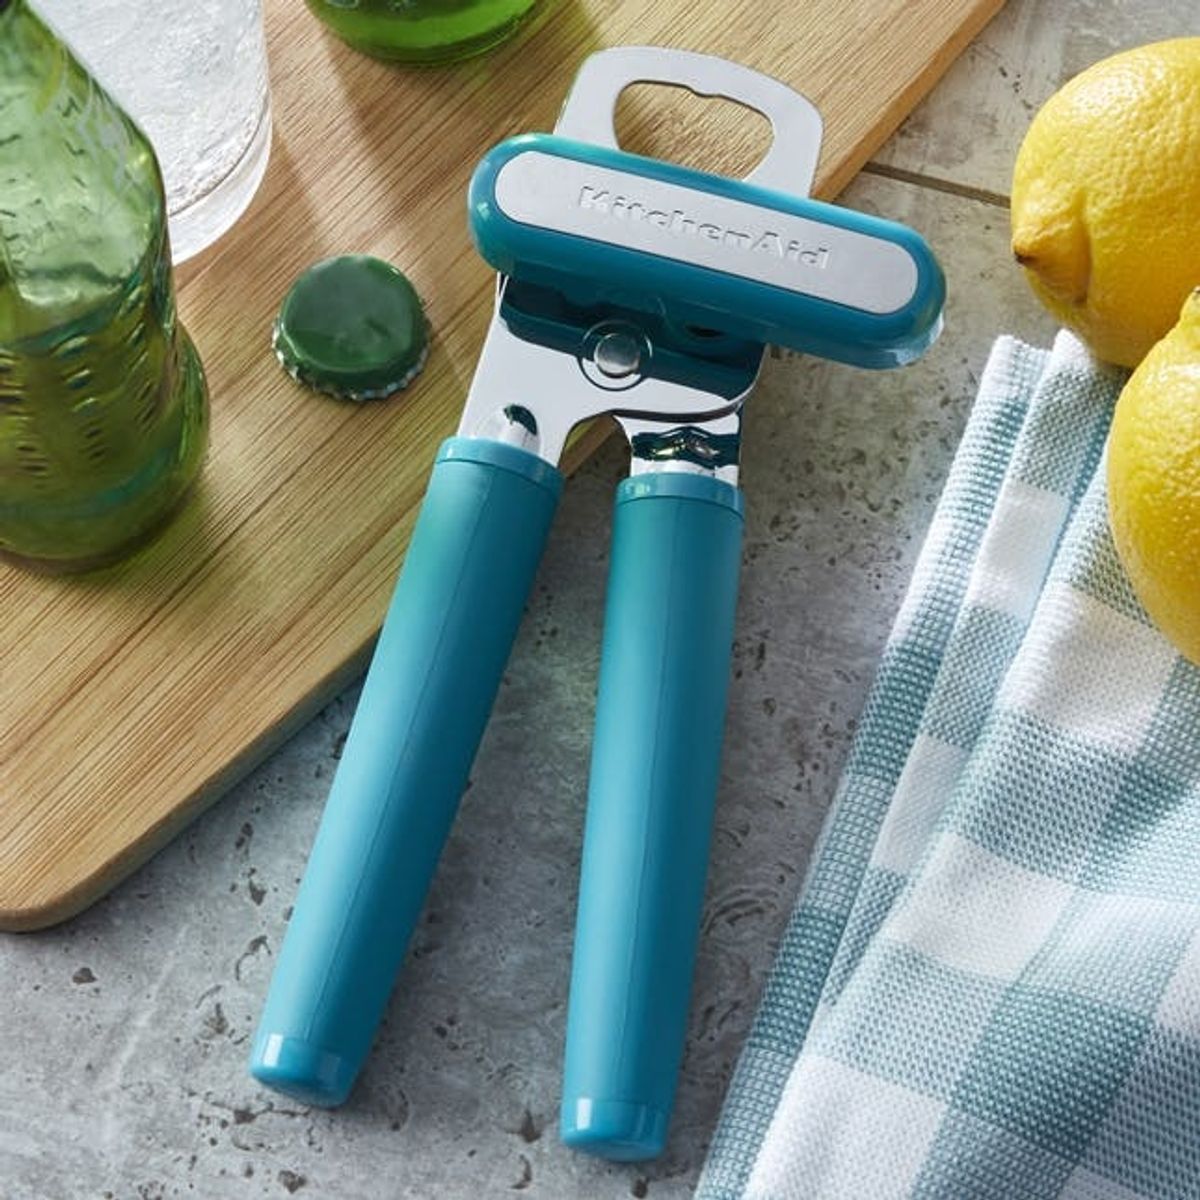 KitchenAid Teamed Up With Walmart for a Budget-Friendly Kitchen Collection